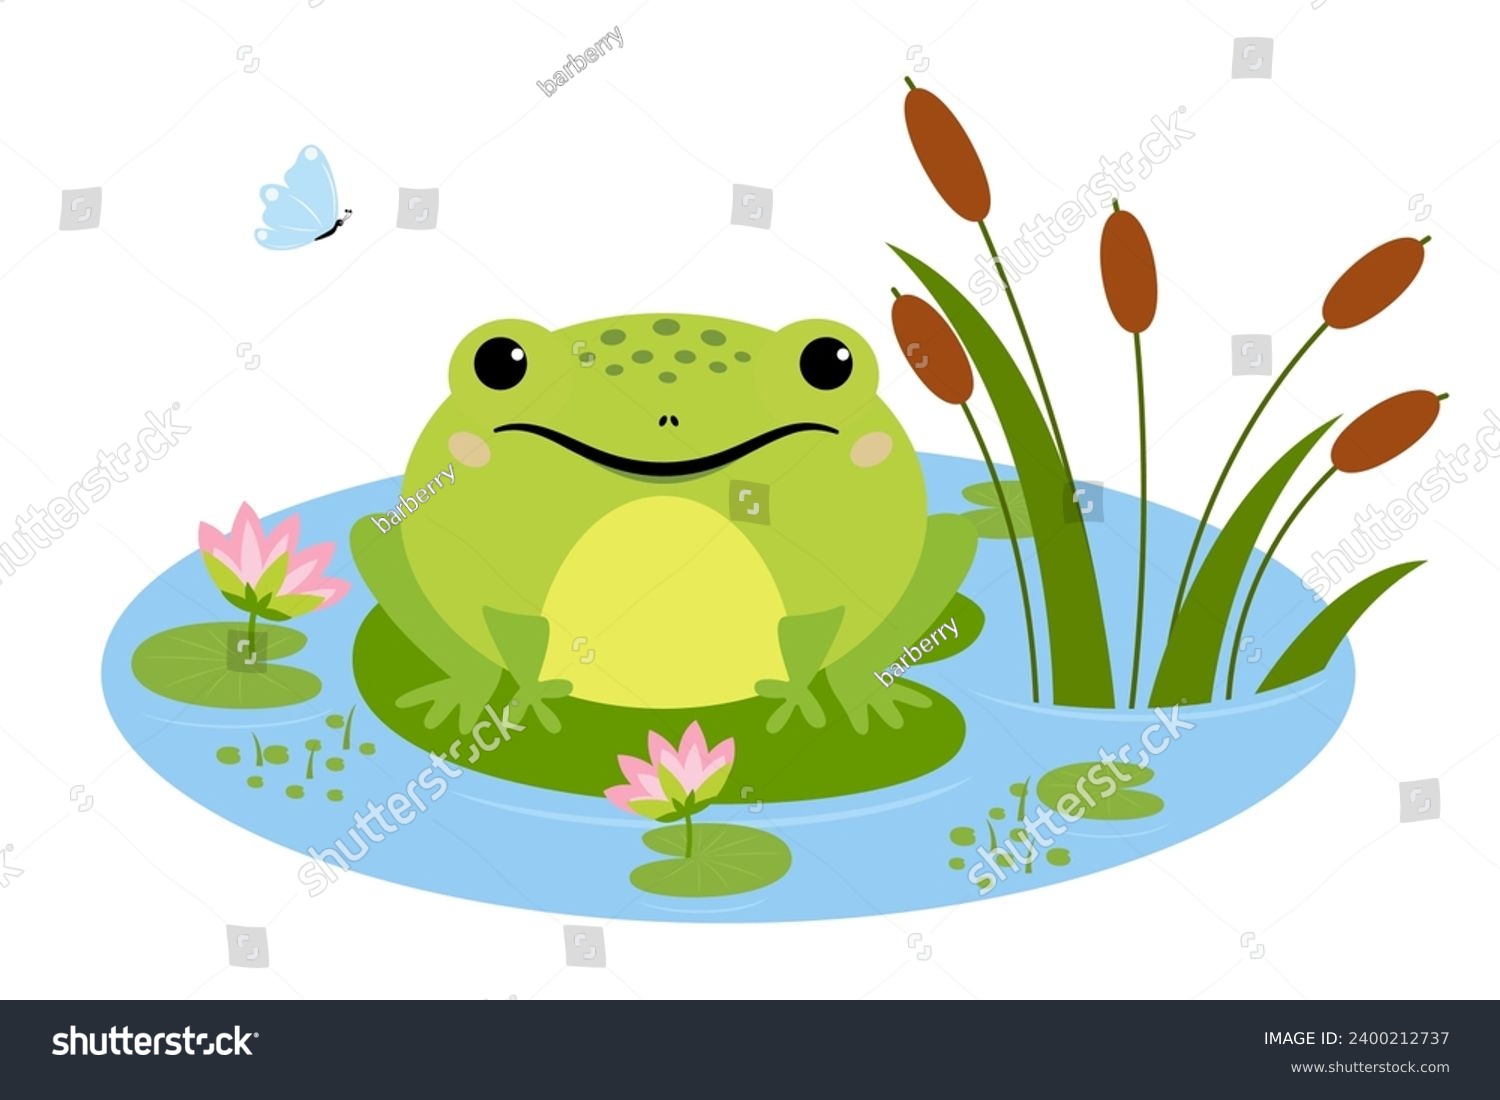 SVG of Cartoon frog sitting in pond, cute amphibia. Green toad in natural habitat, froggy water animal in pond with water lilies and butterfly svg